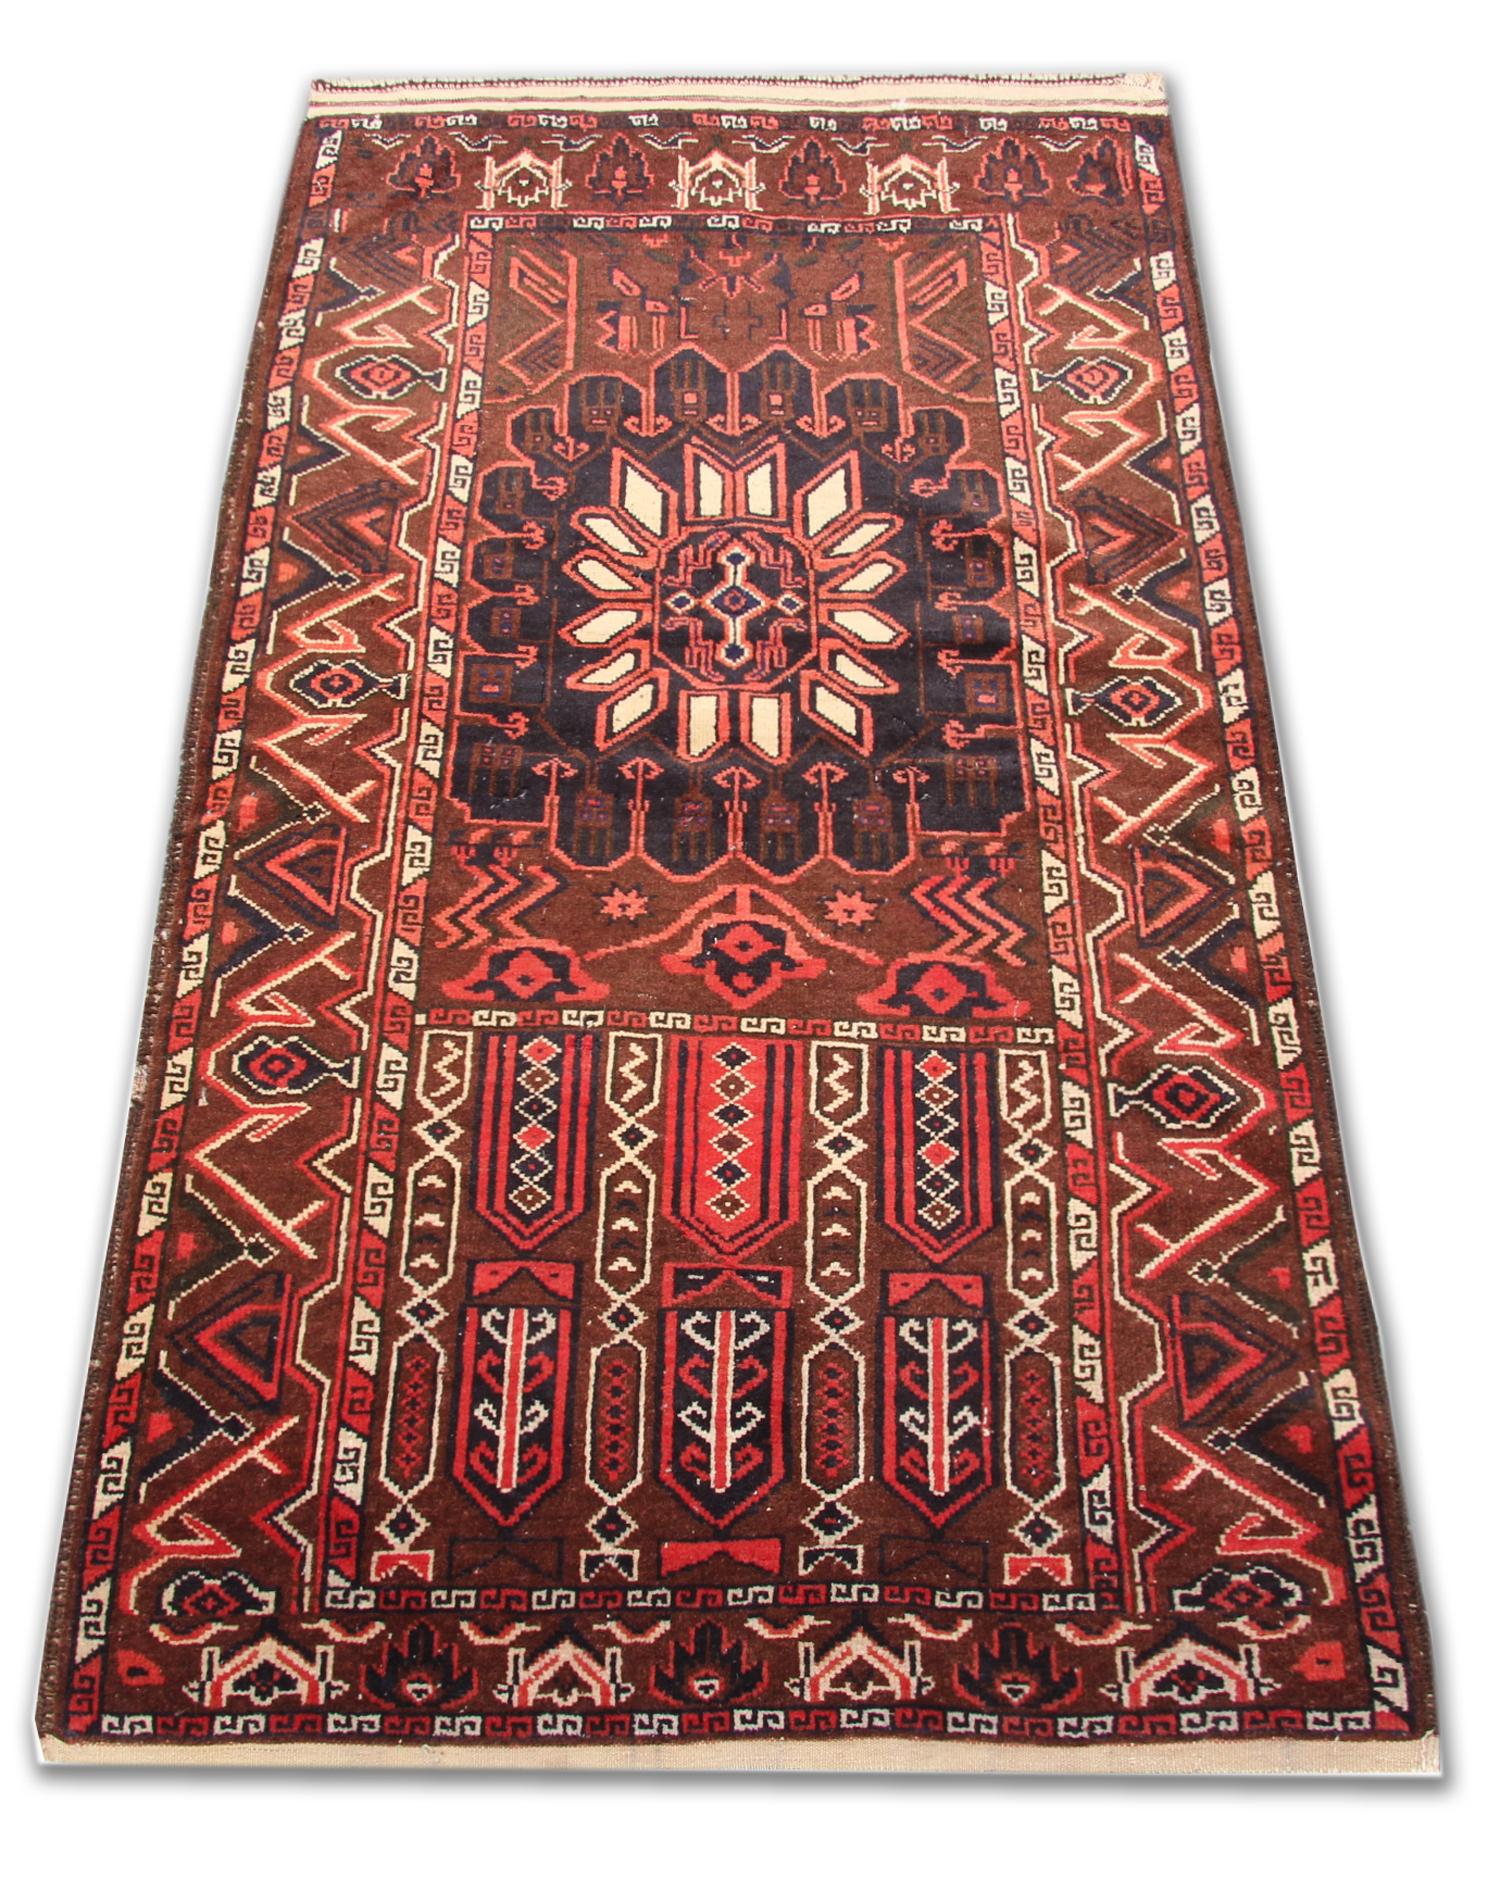 This fine wool rug was woven by hand in the 1980s in Afghanistan. The central design features a rich burgundy background with red, blue and cream accents that make up the tribal design. Intricately woven with delicate detail through both the centre